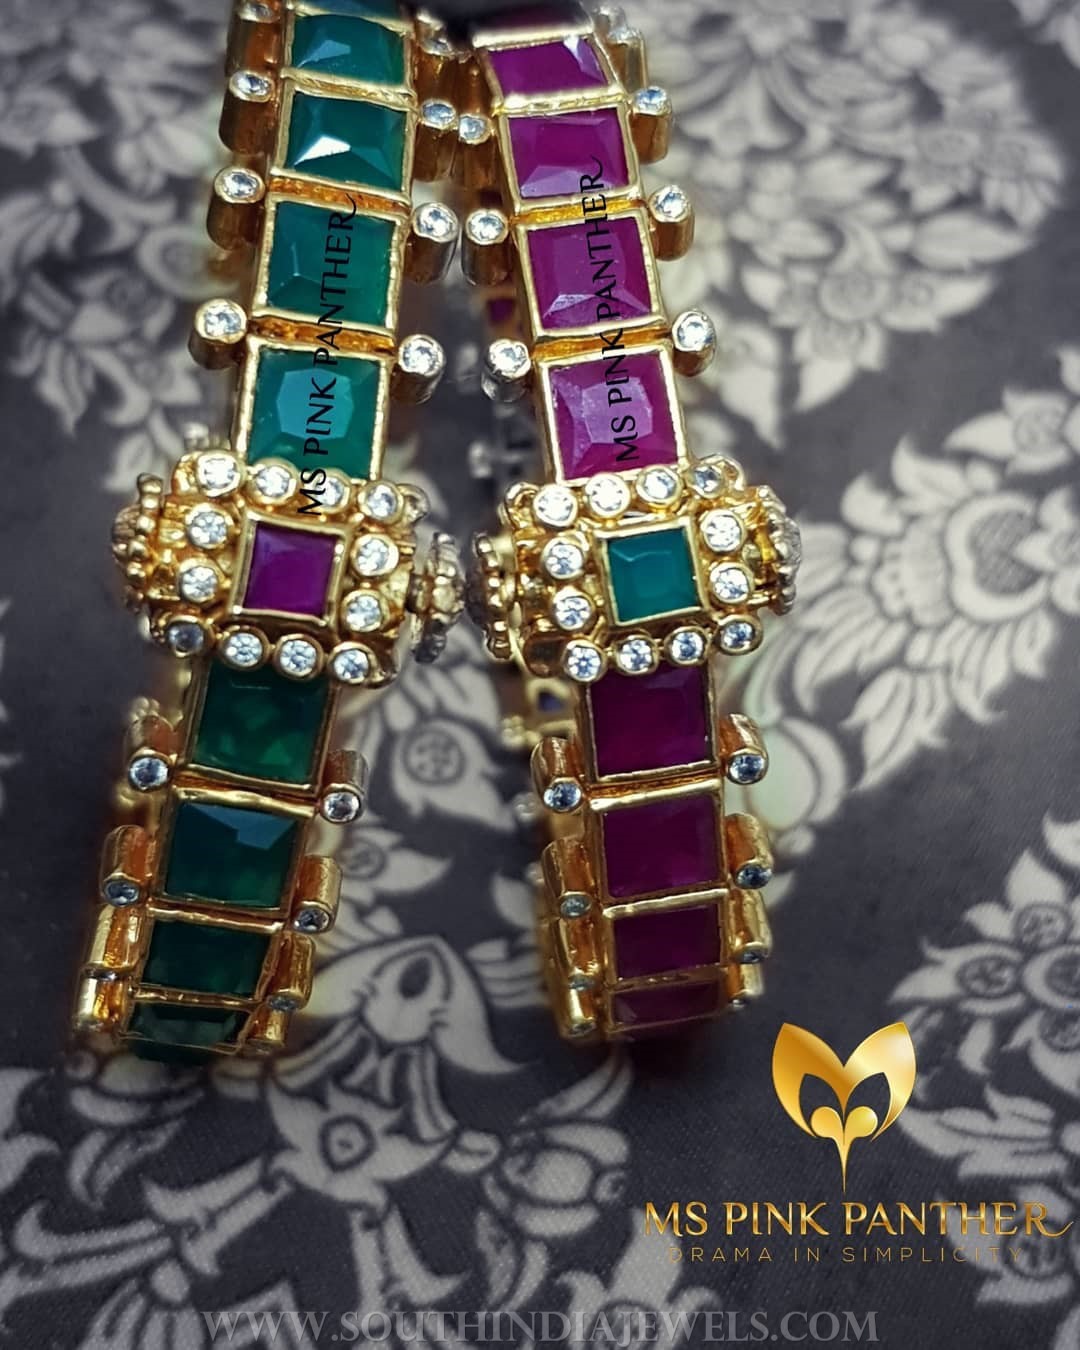 Antique Kada Bangles From Ms Pink Panthers